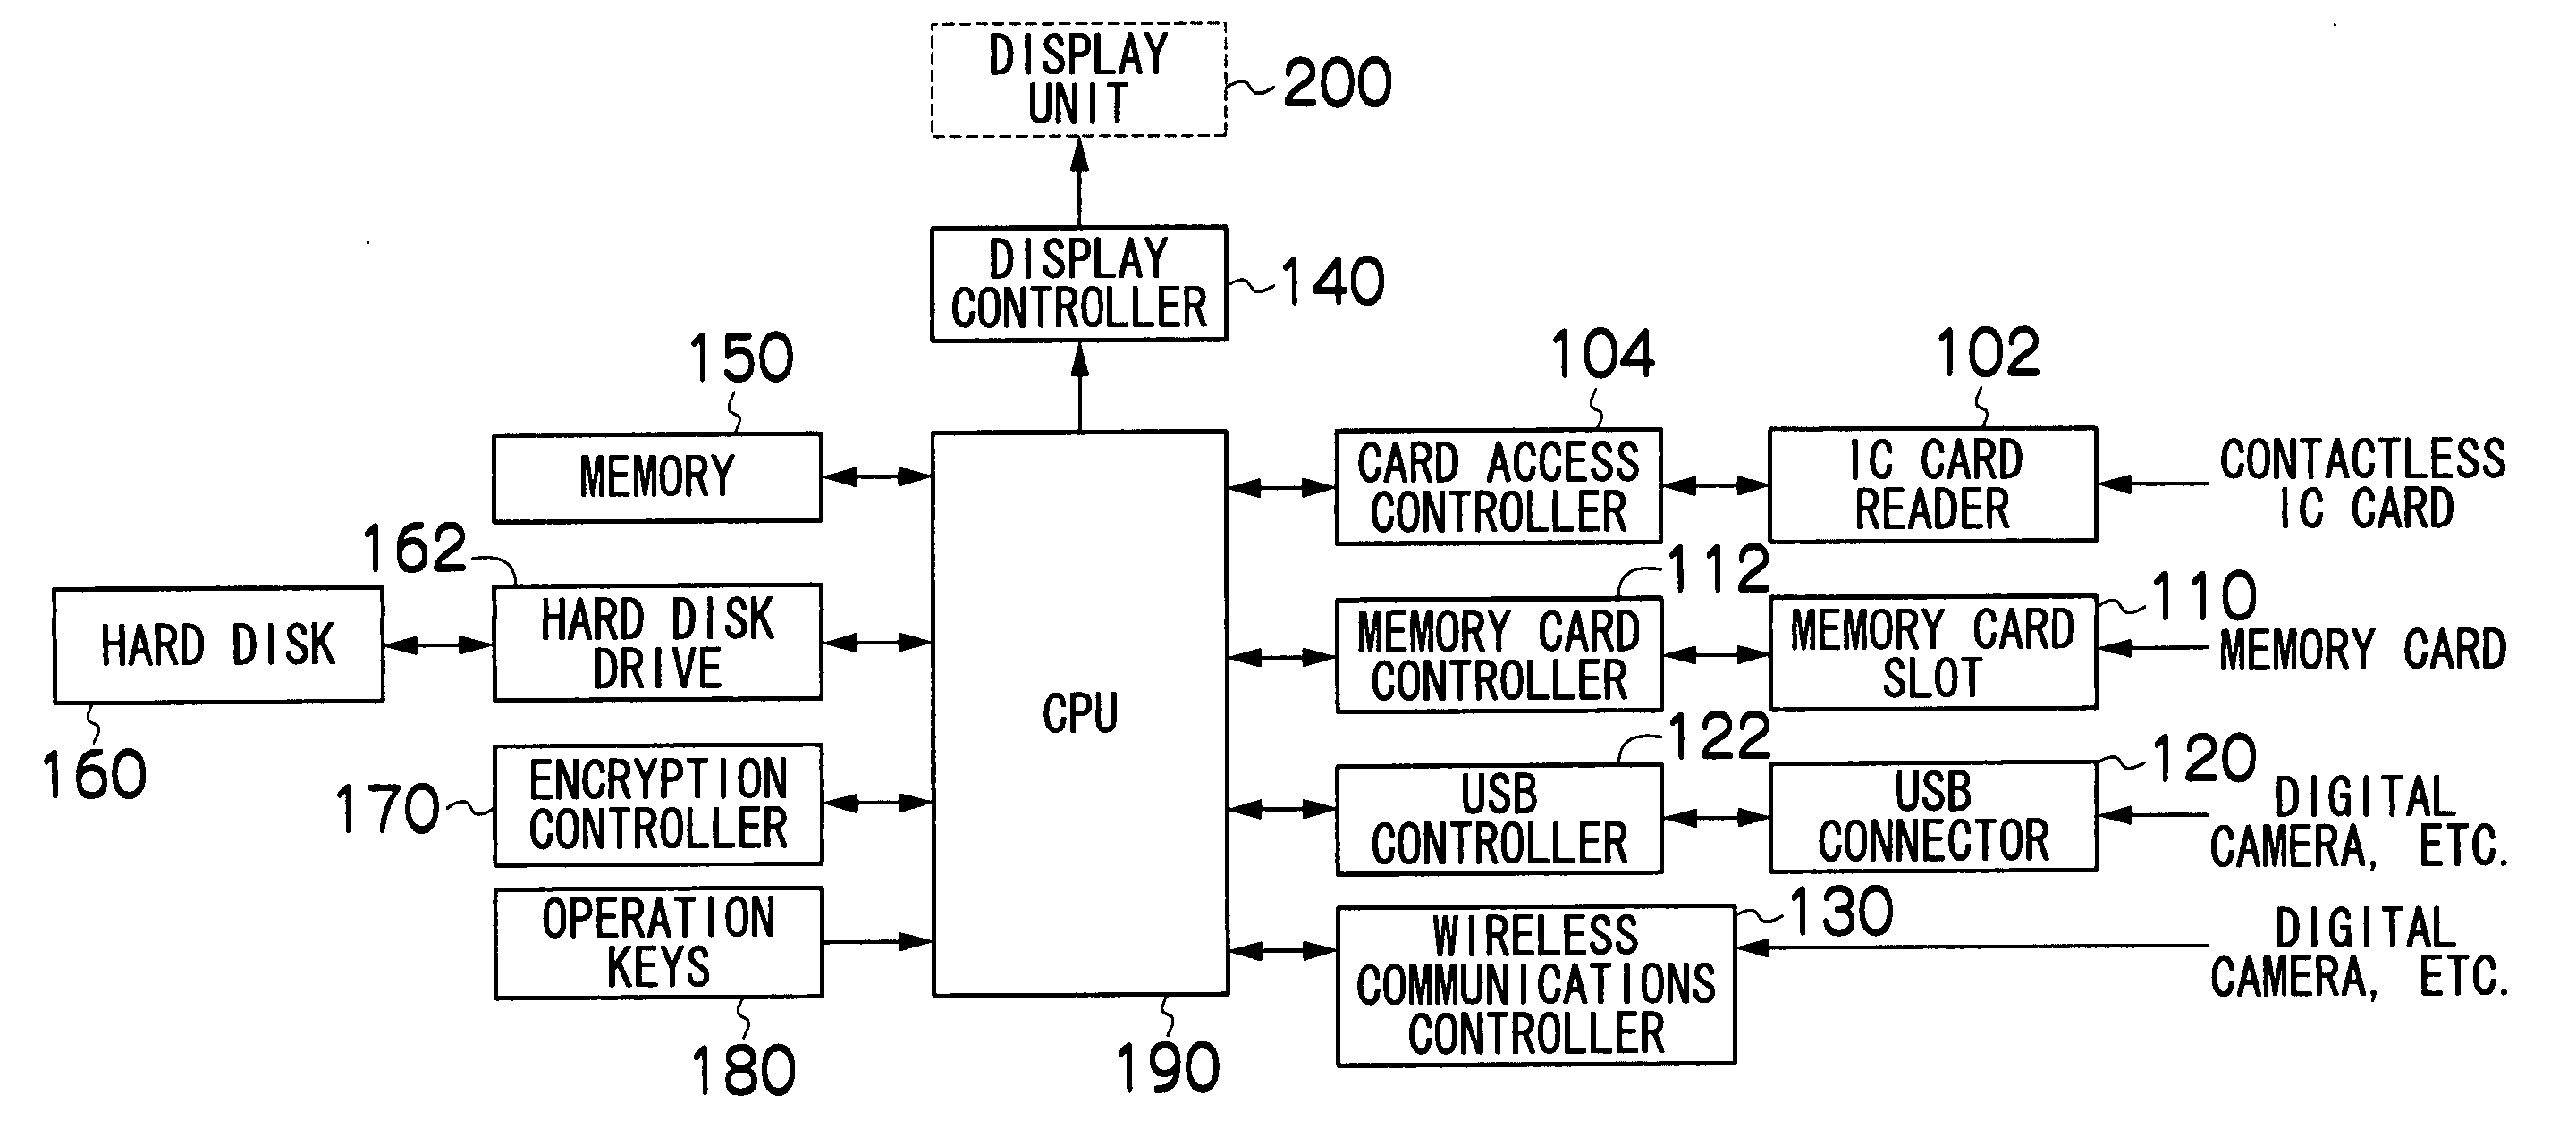 Image management apparatus and method